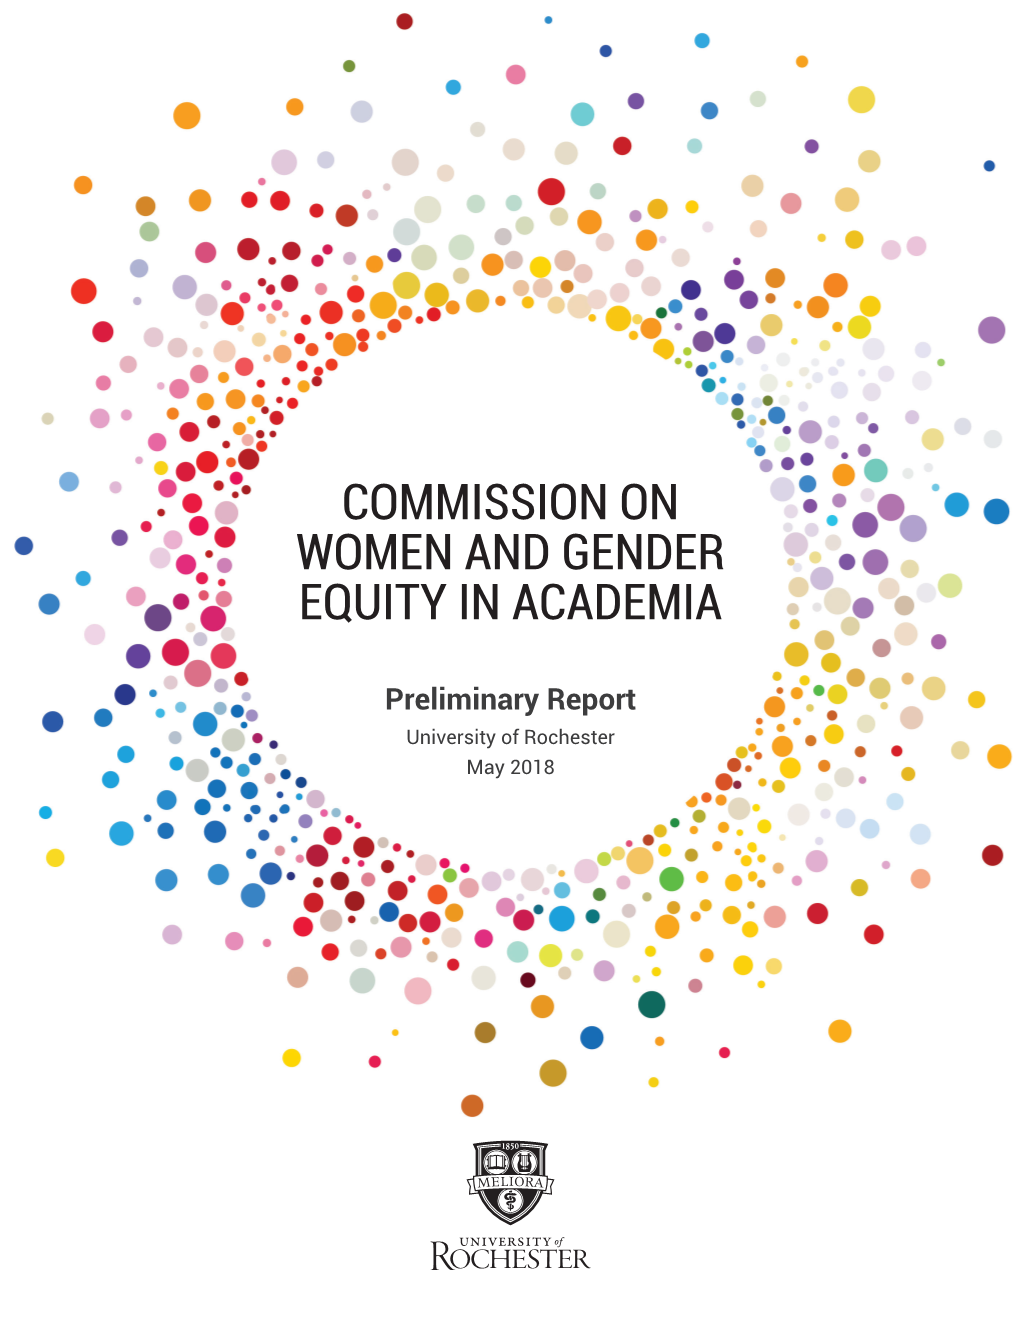 Commission on Women and Gender Equity in Academia